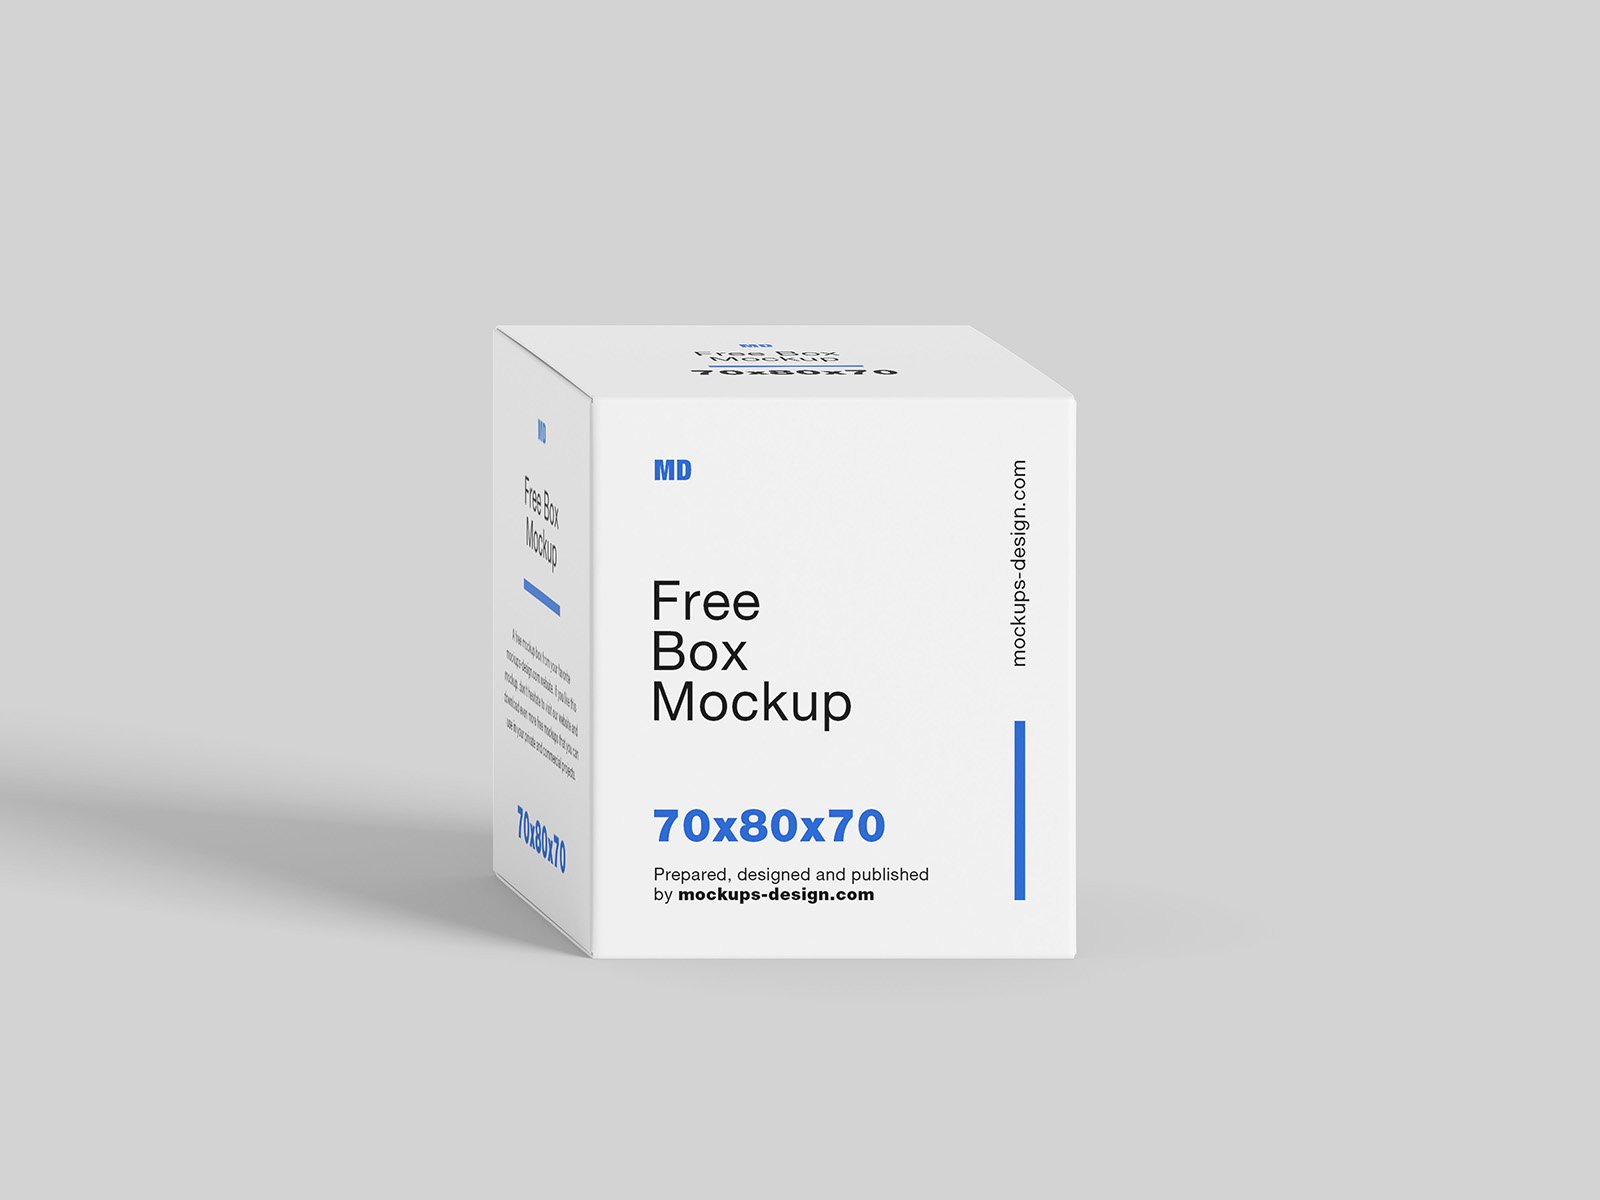 5 Scenes from the Packaging Box Mockup FREE PSD